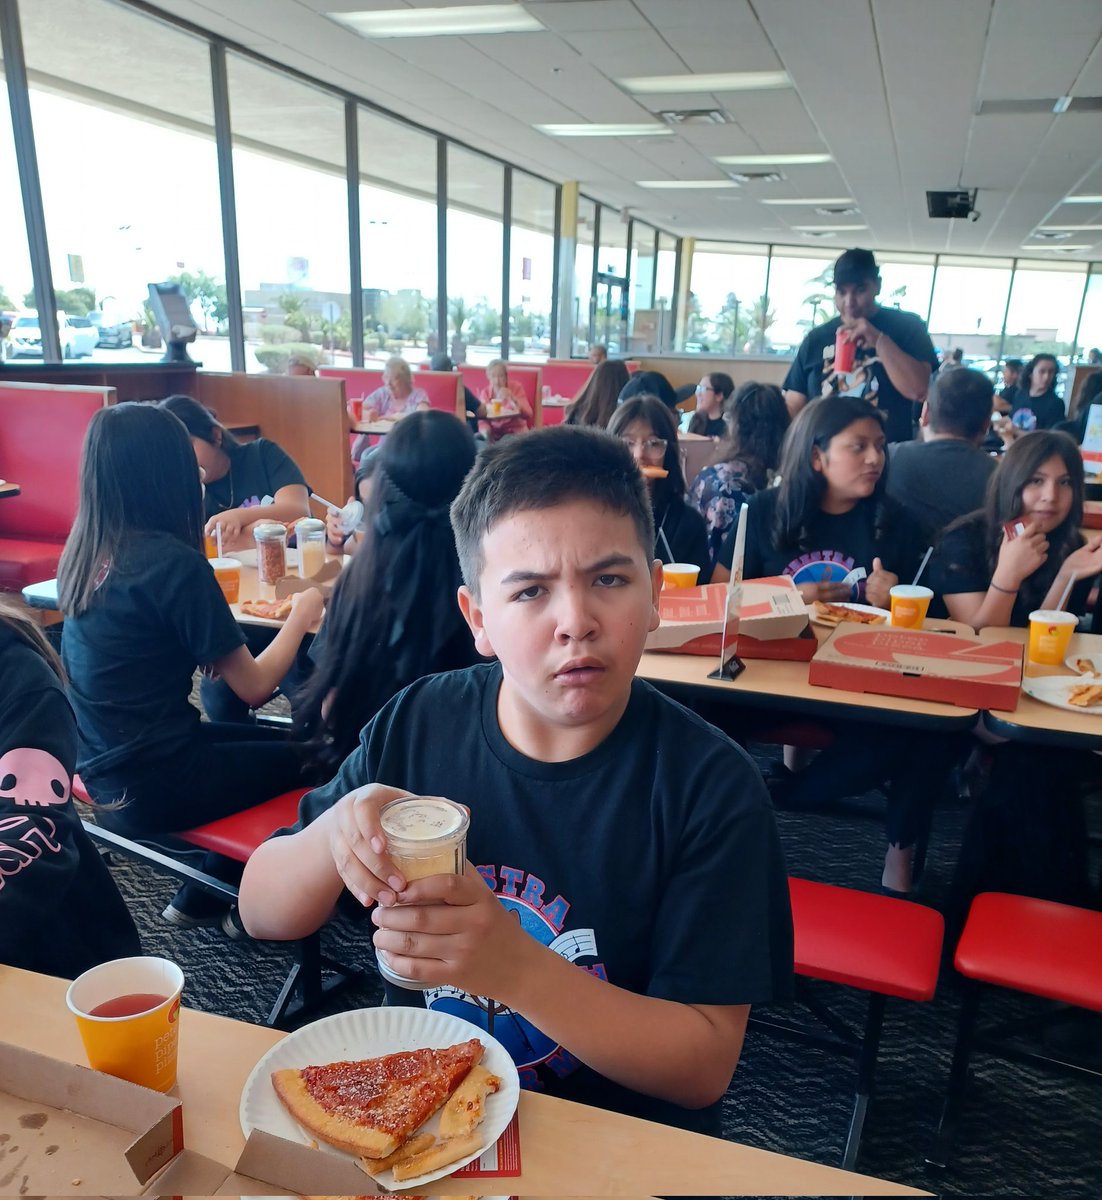 Congratulations to our might Bel Air Middle Varsity and Non-Varsity orchestras for receiving Superior ratings on stage at the YISD Pre UIL contest! Hard work pays off with a celebratory trip to Peter Piper!!